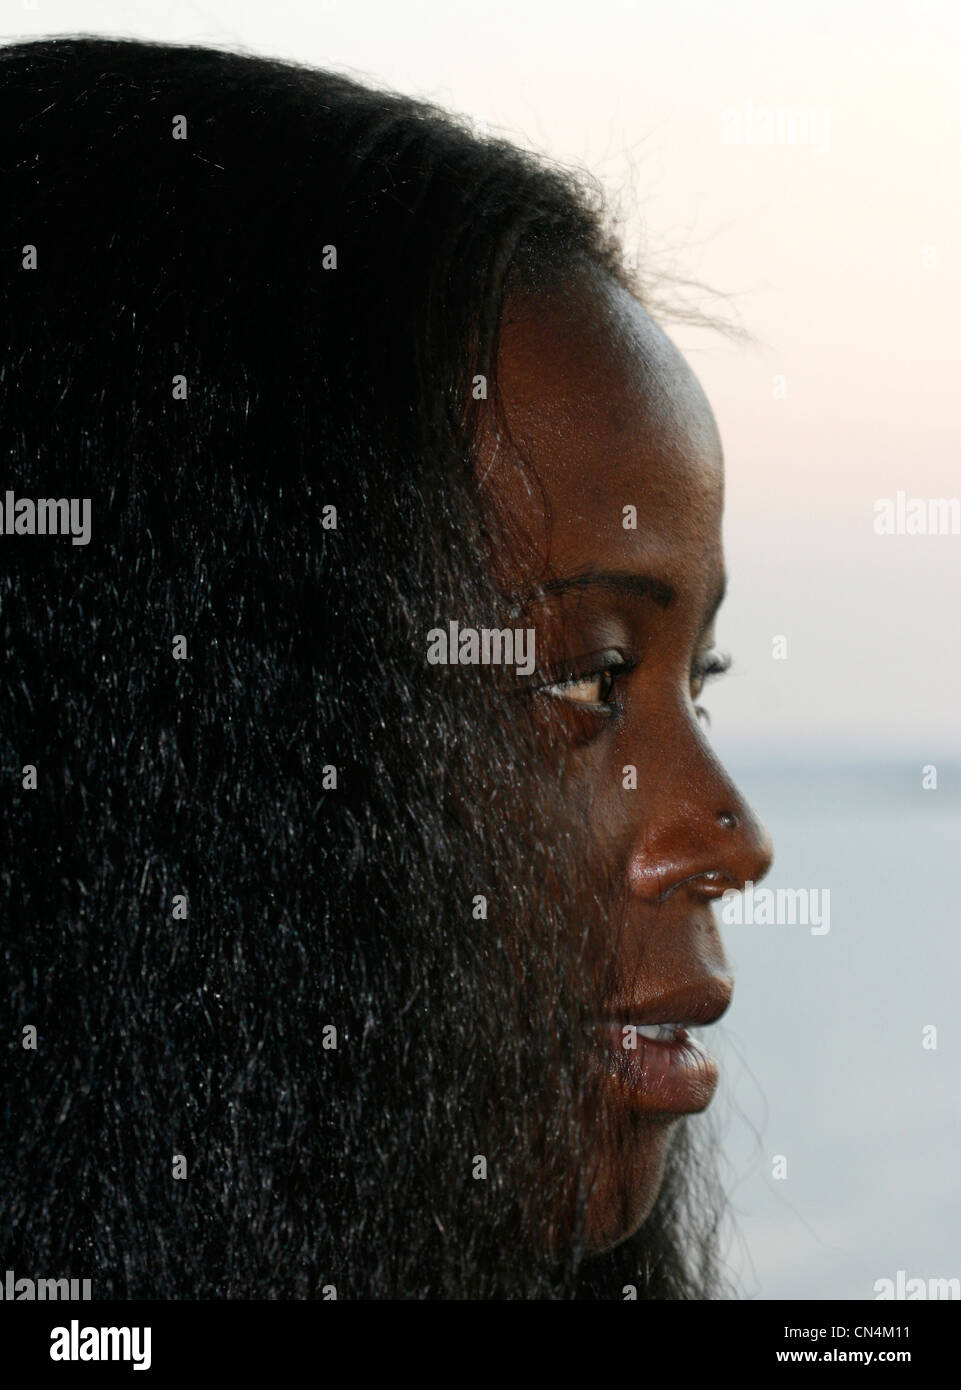 A young African woman looking thoughtful Stock Photo